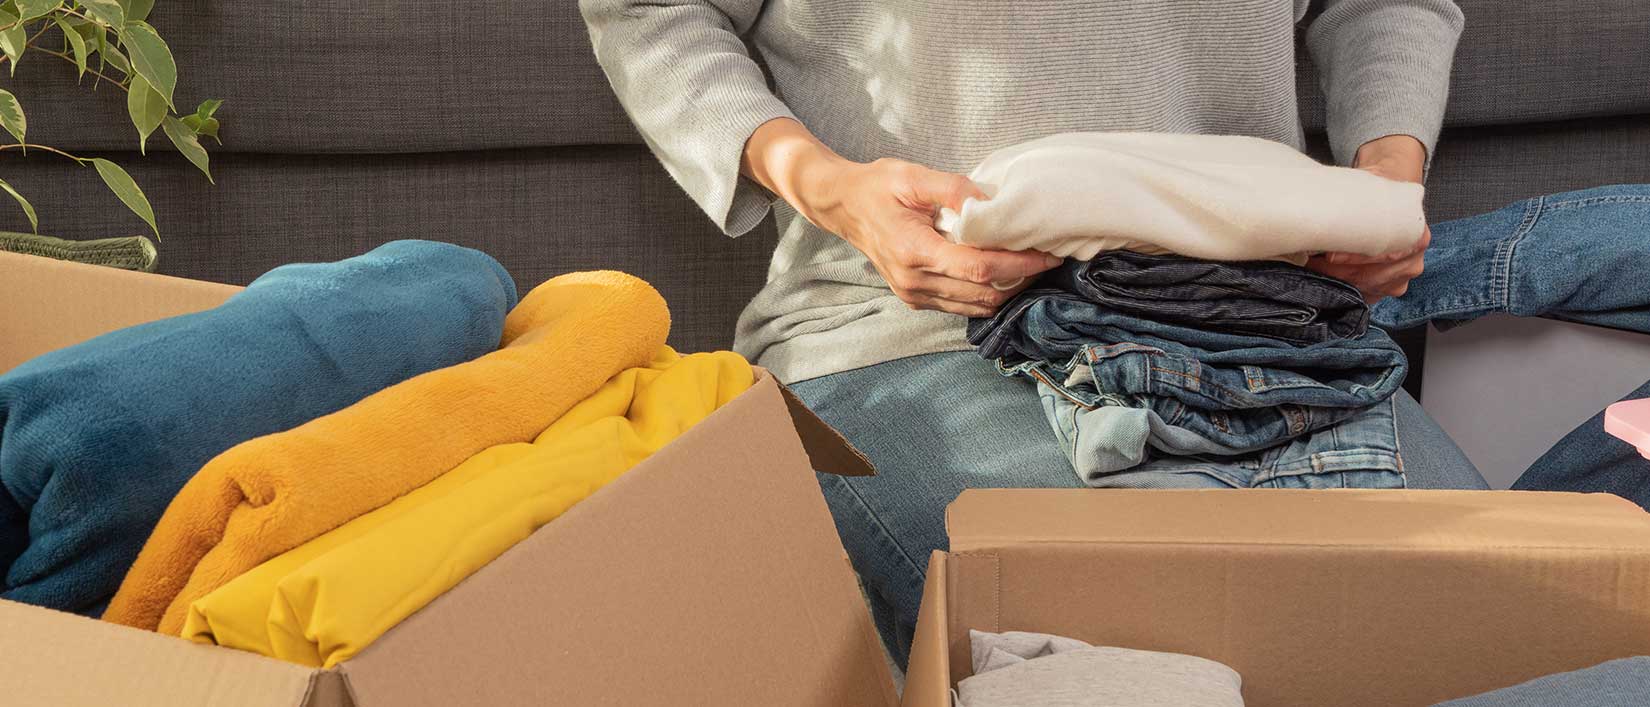 Packing Mistakes to Avoid, According to a Professional